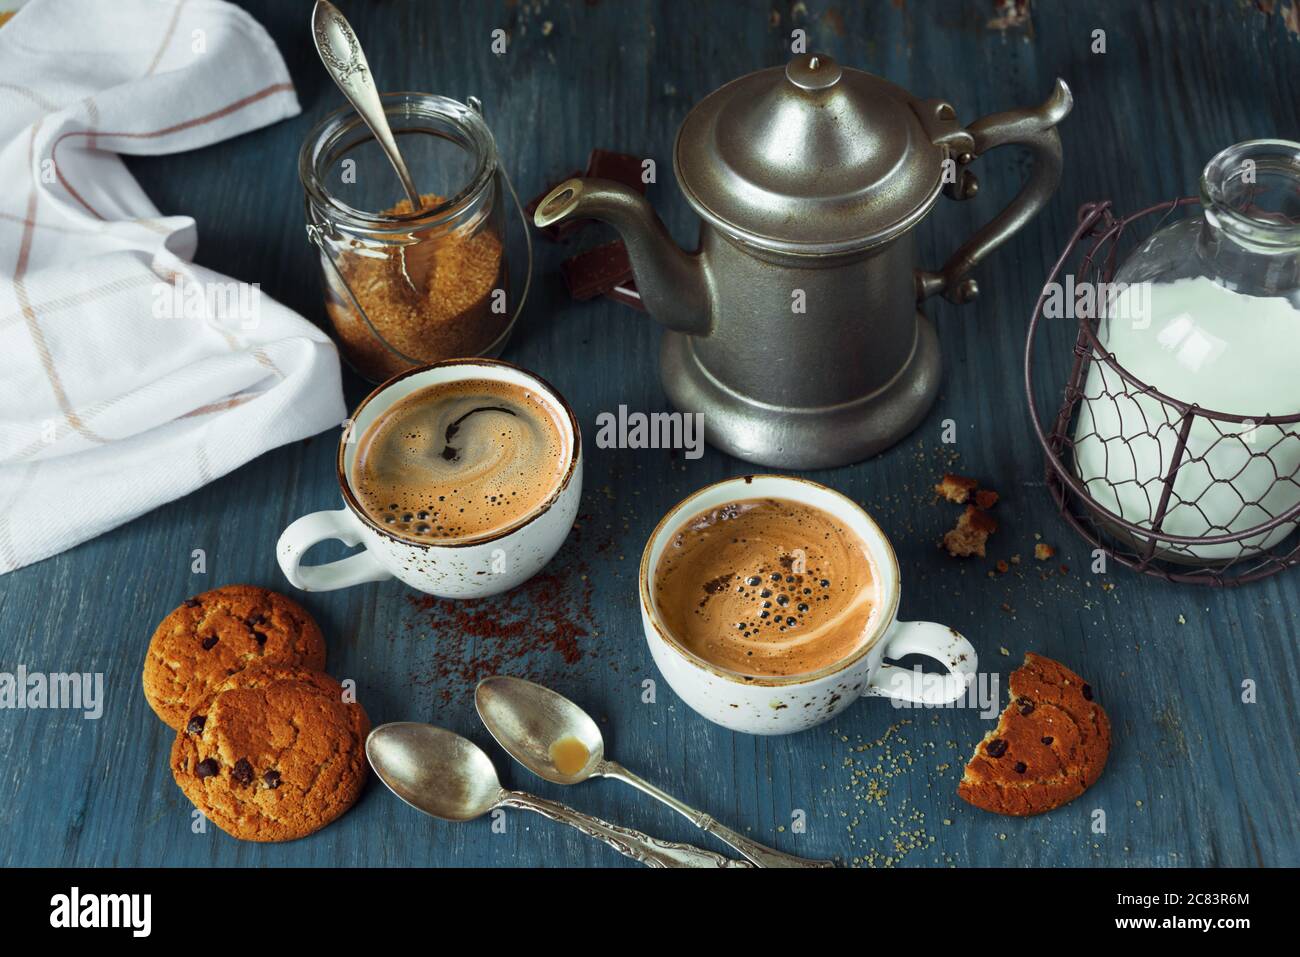 Family breakfast - two cups of coffee with milk espresso and homemade oatmeal cookies with chocolate on a blue wooden vintage table, rustic style, low Stock Photo